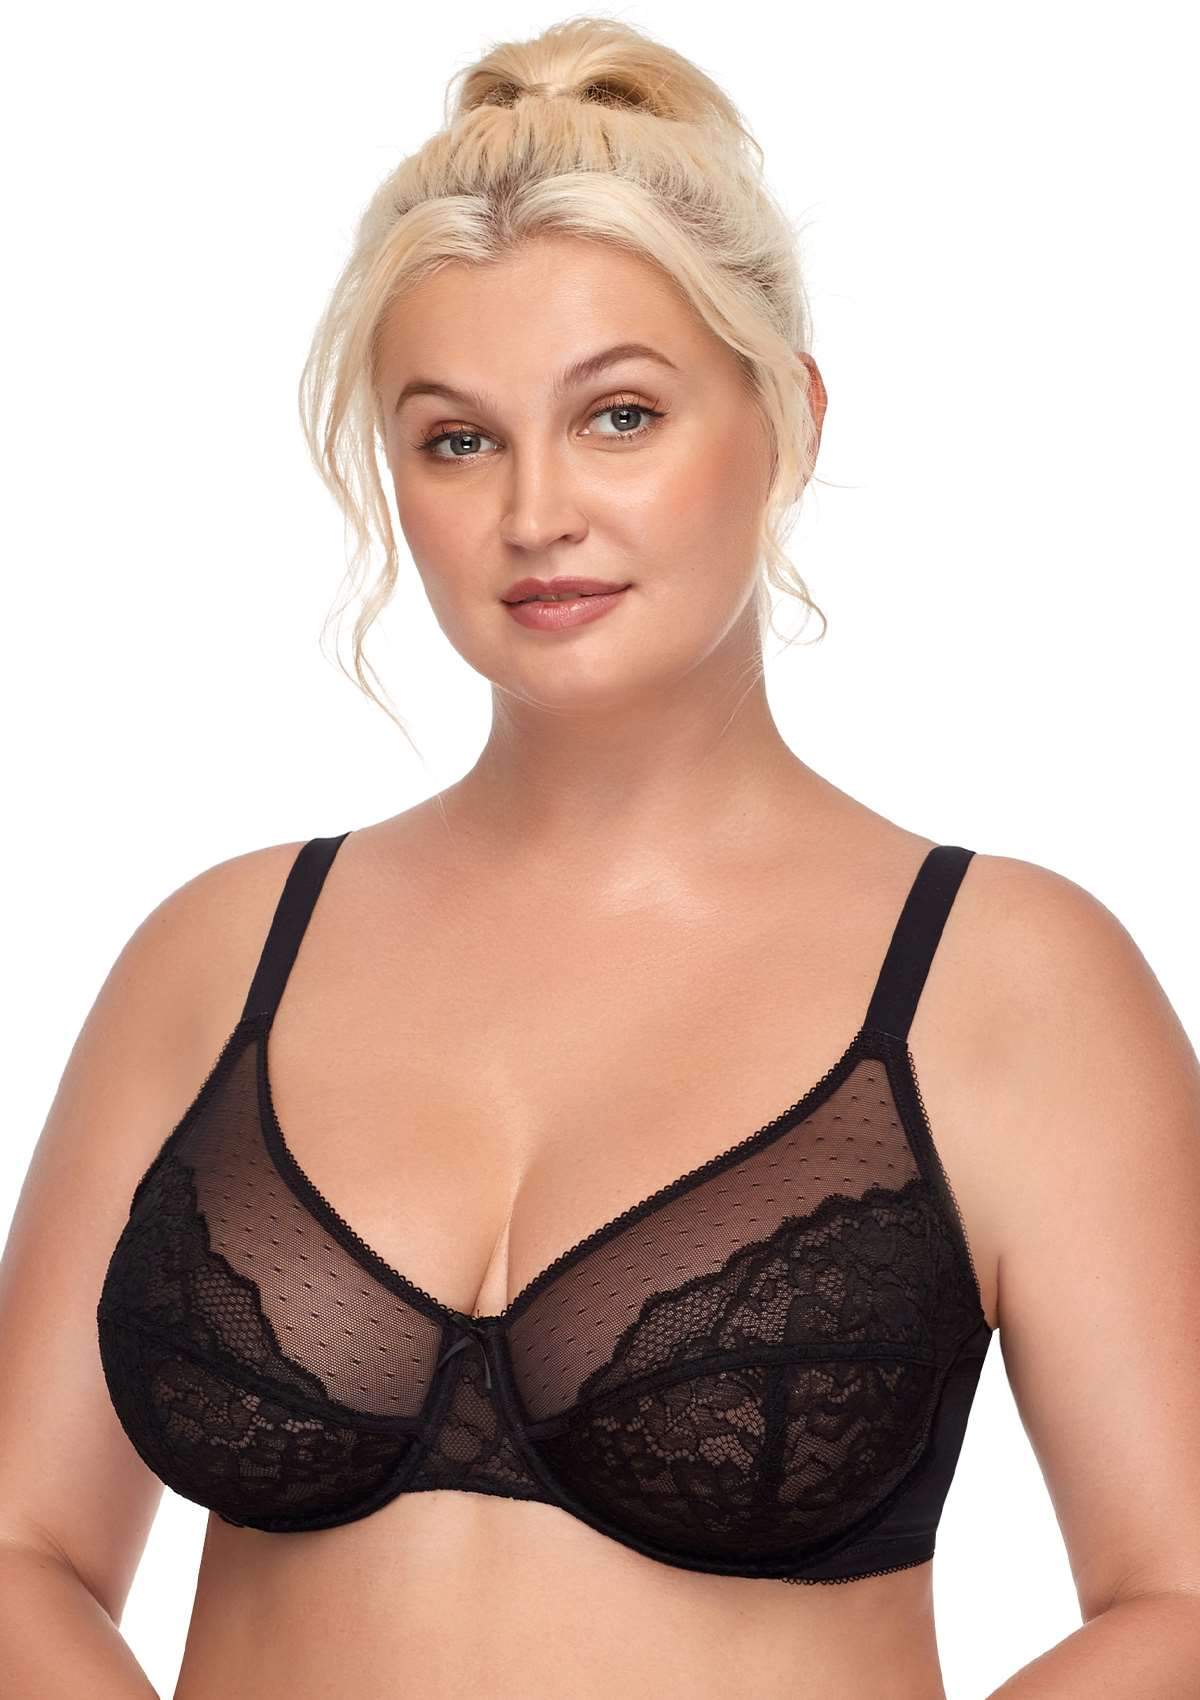 HSIA Enchante Lace Wire Bra For Lifting And Separating Large Breasts - Black / 36 / I